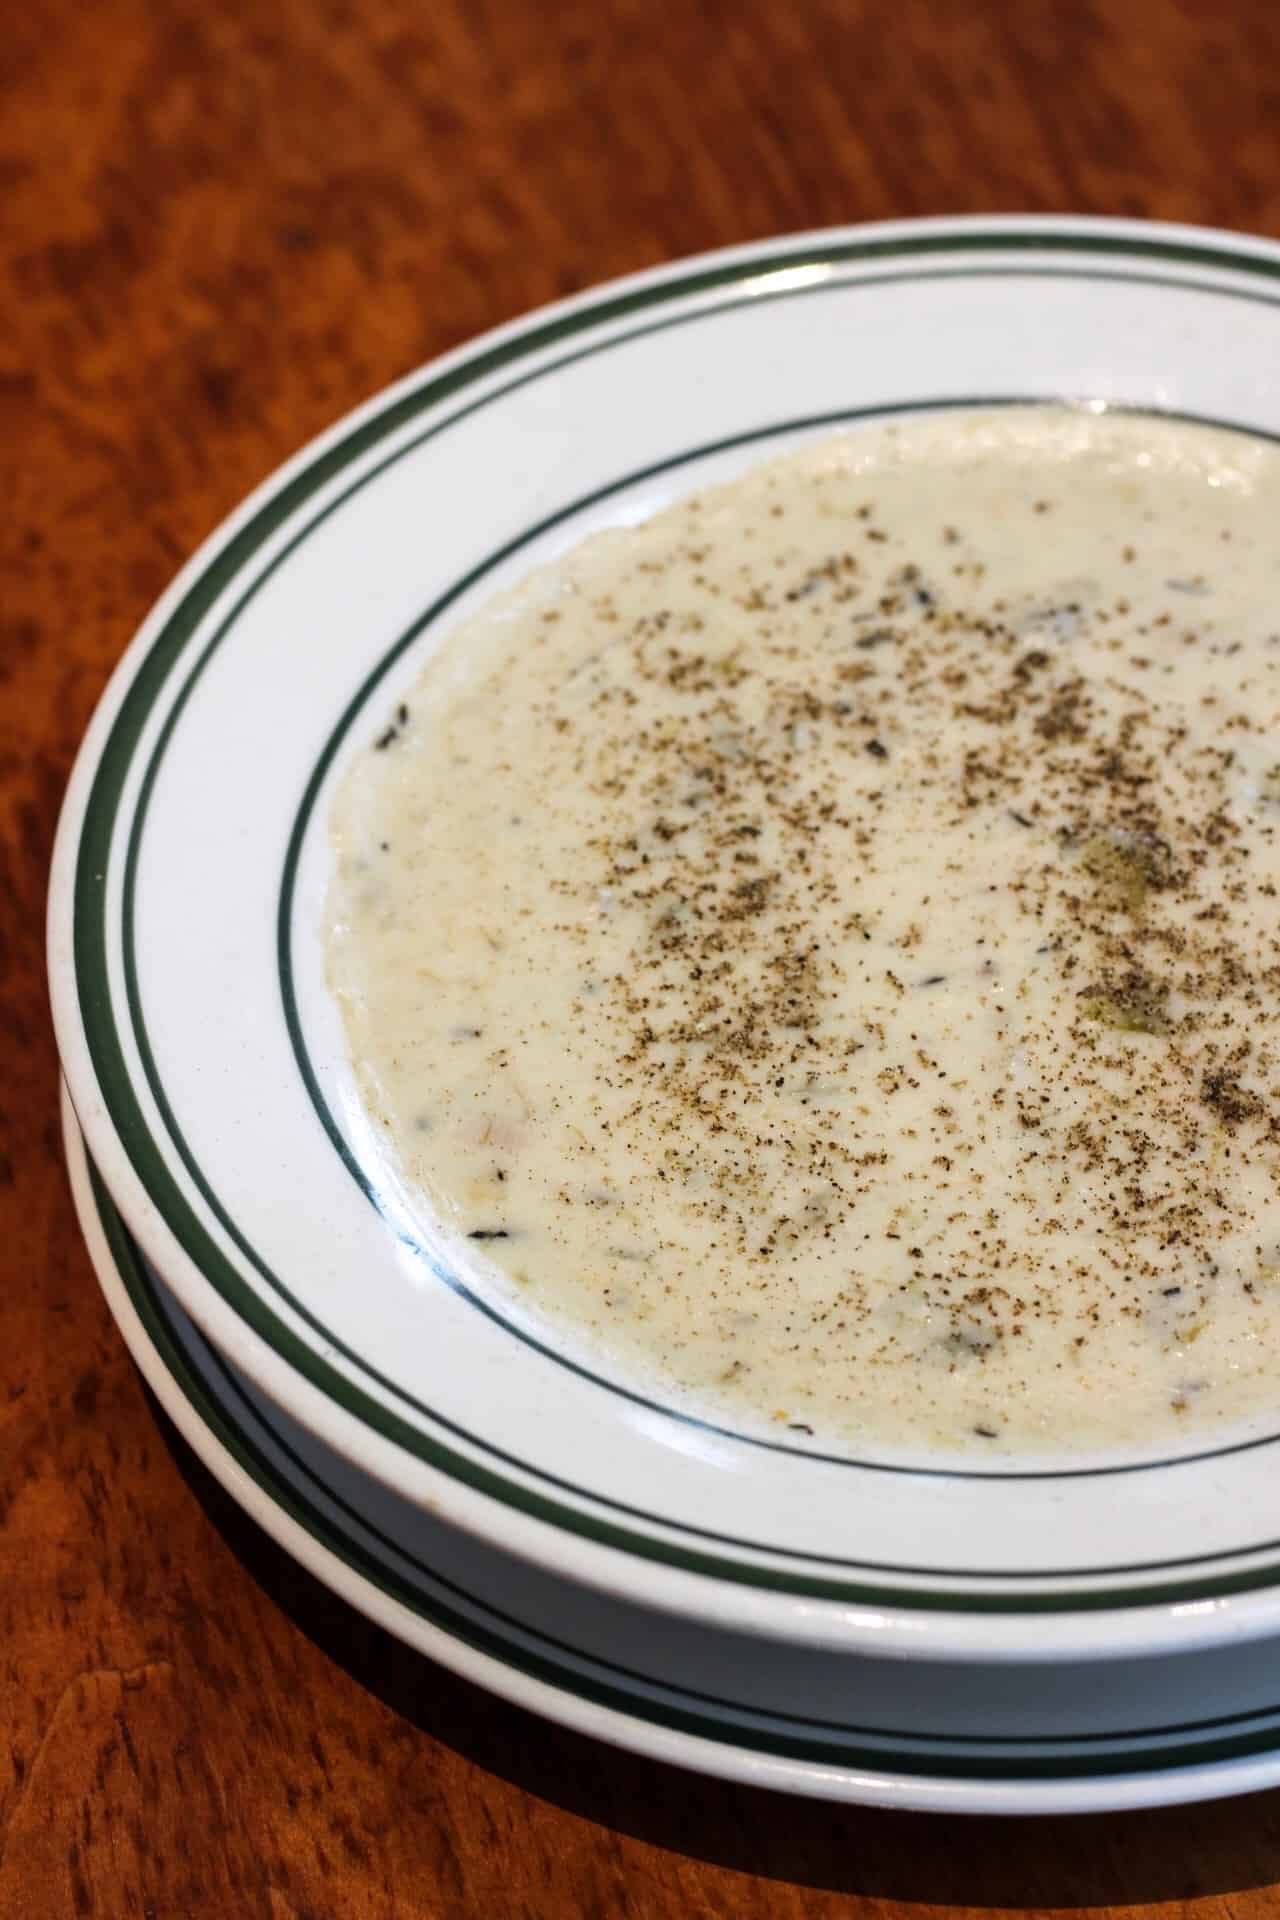 A collection of restaurants that serve the best soup in Salt Lake City, Utah! From clam chowder to chicken noodle to french onion, we have you covered.